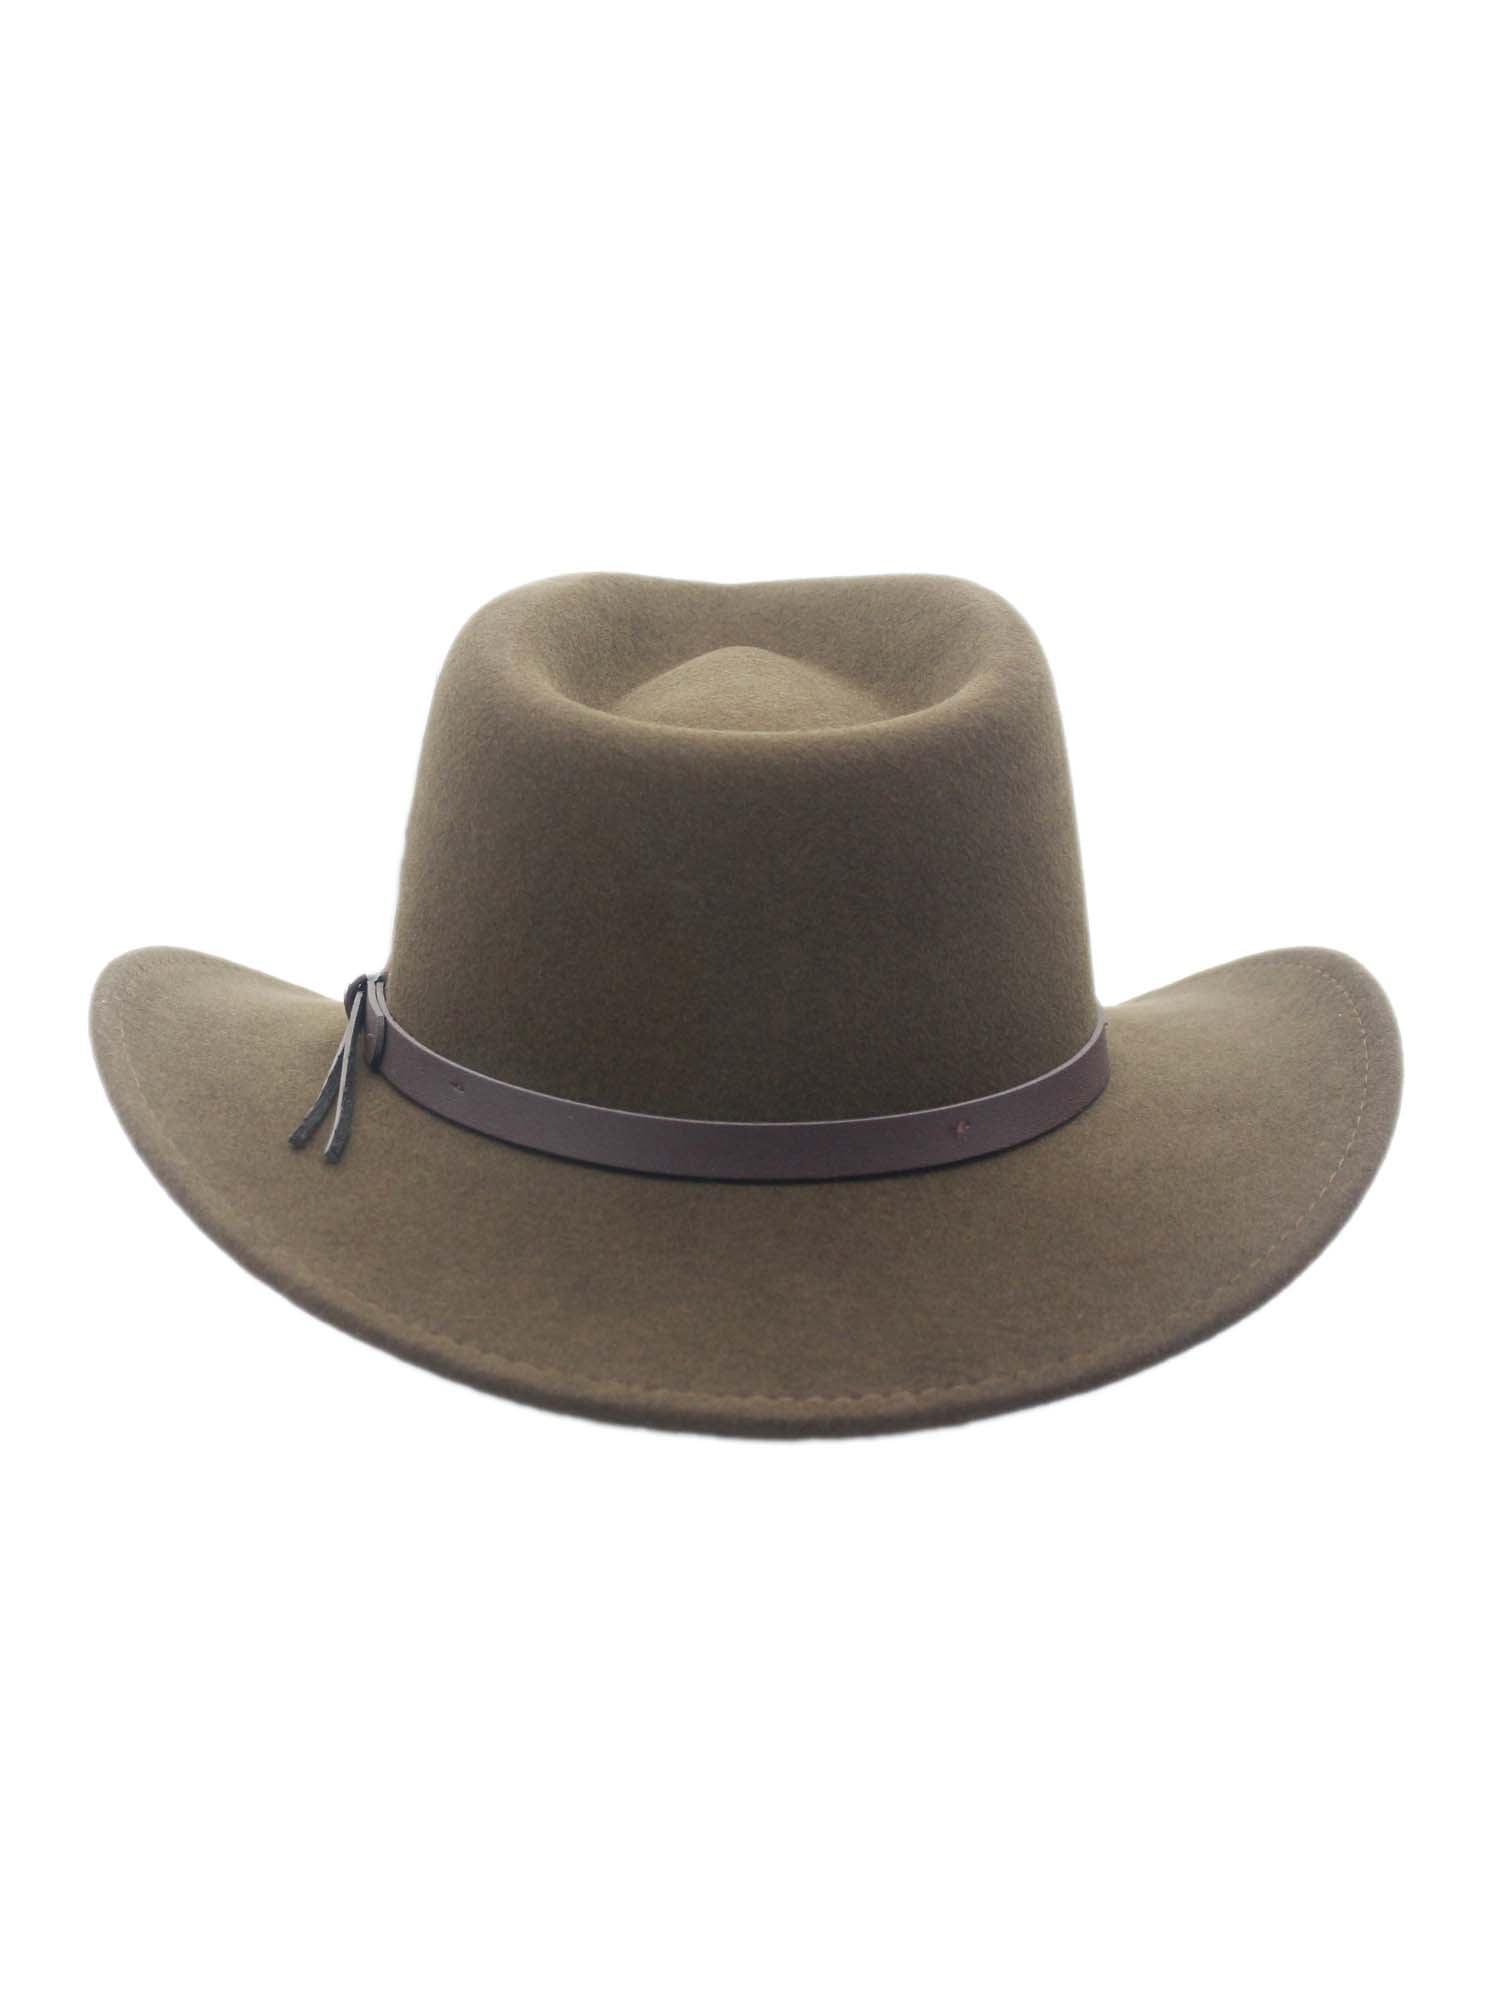 Montana Crushable Wool Felt Western Style Cowboy Hat by Silver Canyon ...